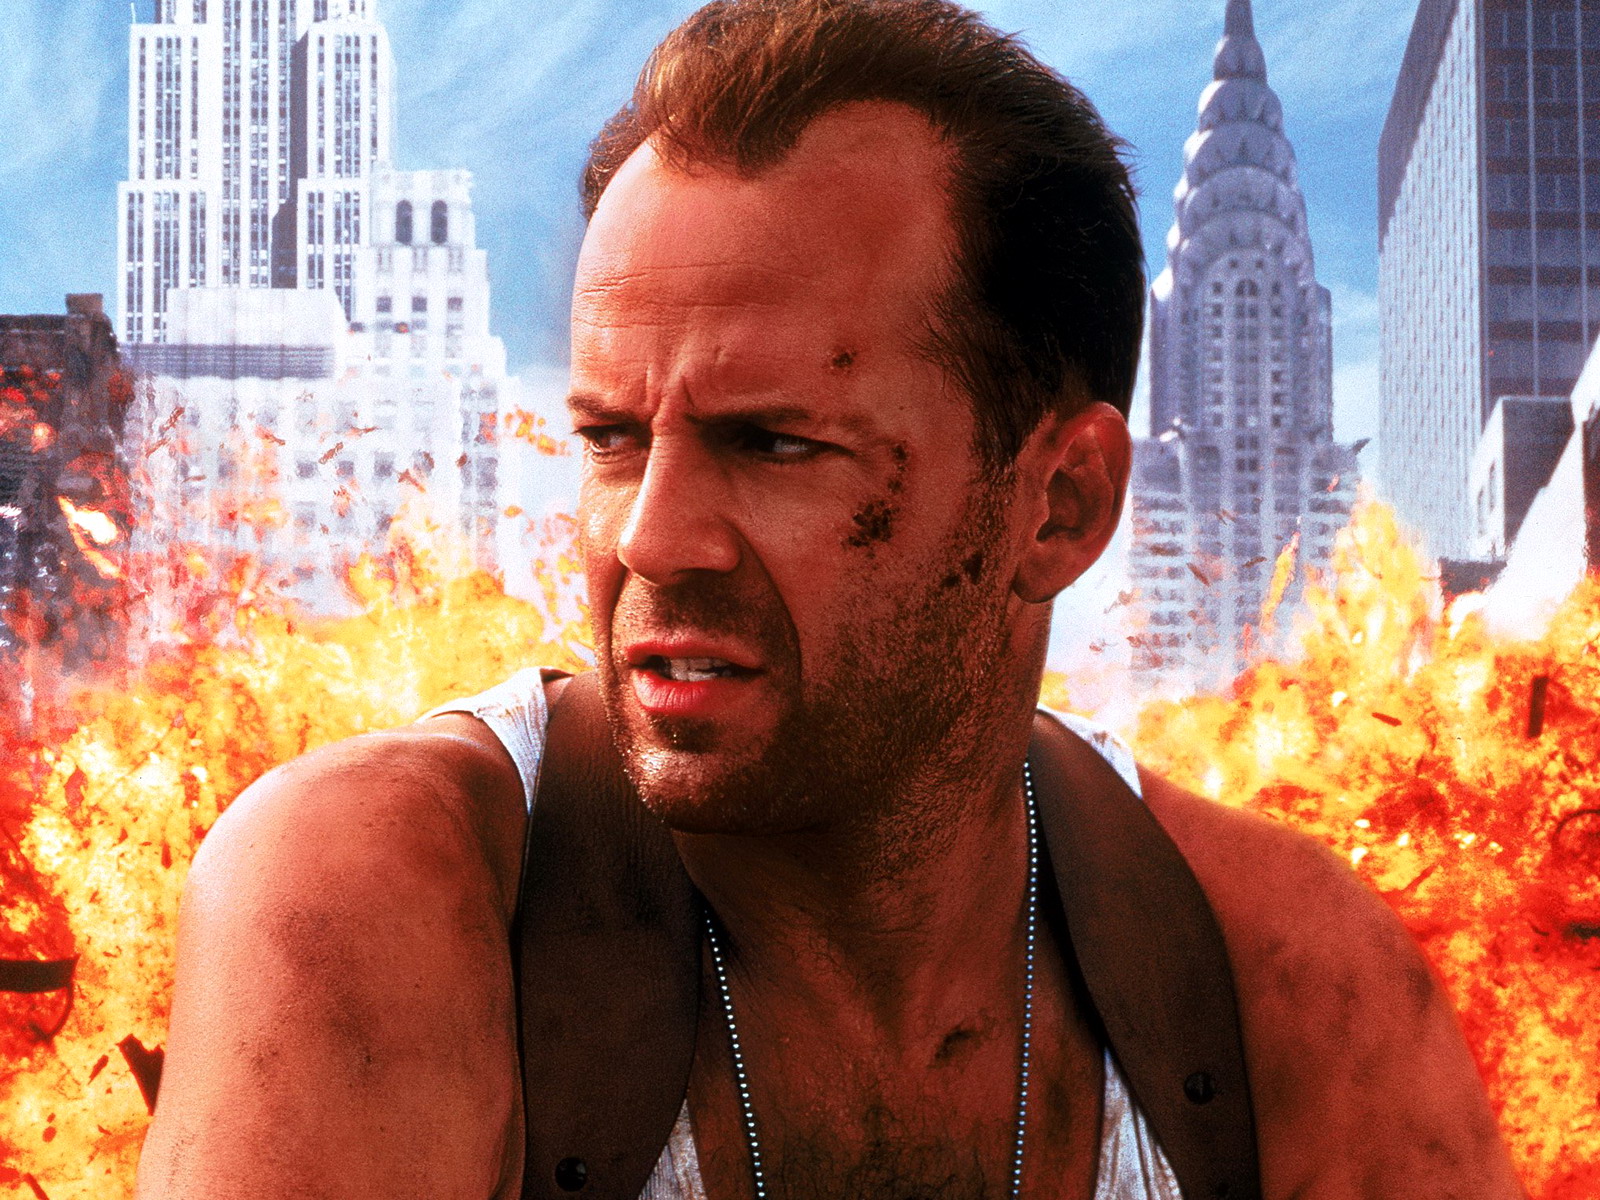 What’s Your IQ, Based Only on Your Opinions About Movies? Die Hard